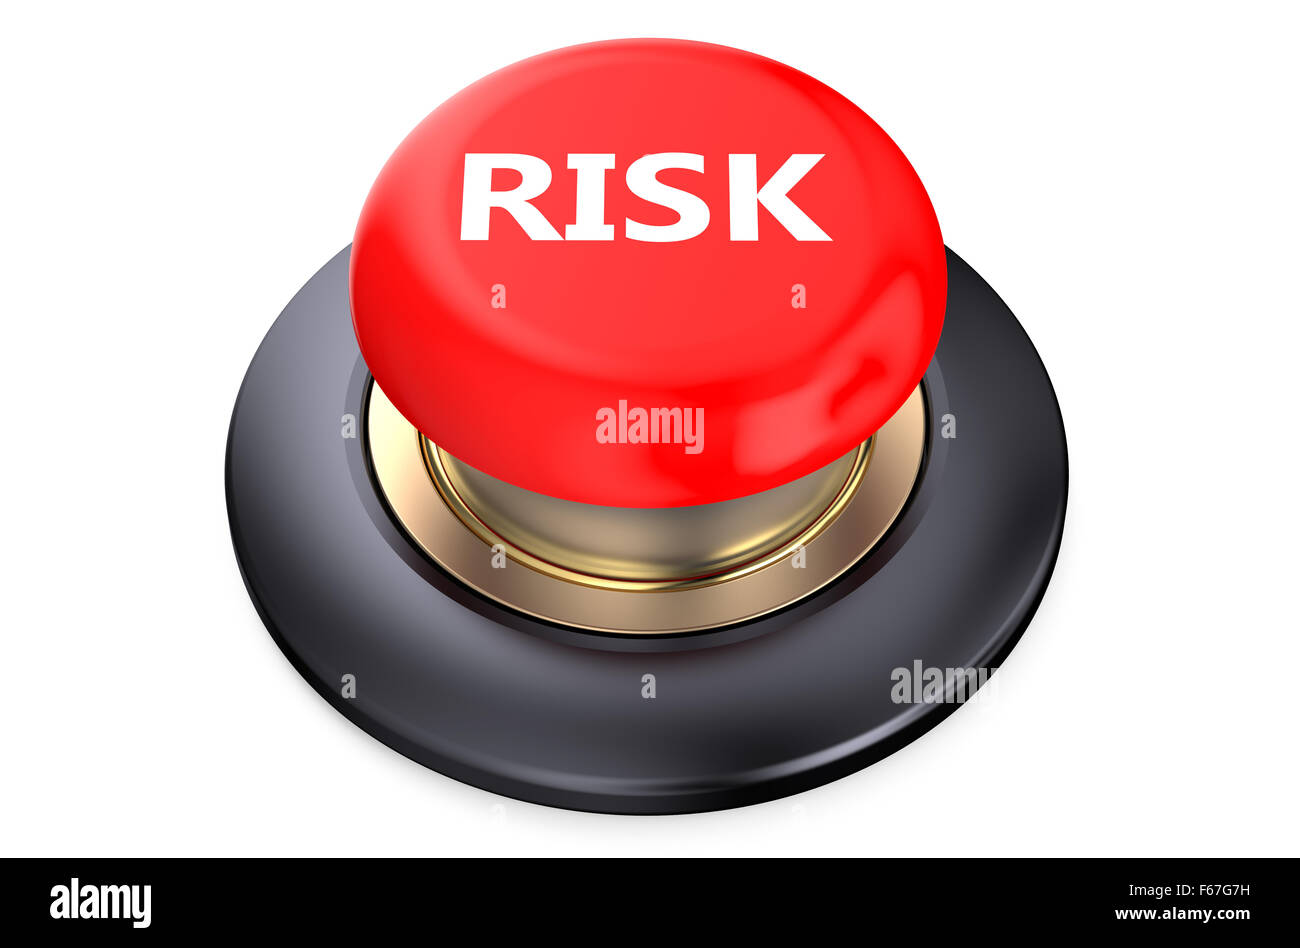 Risk red push button isolated on white background Stock Photo